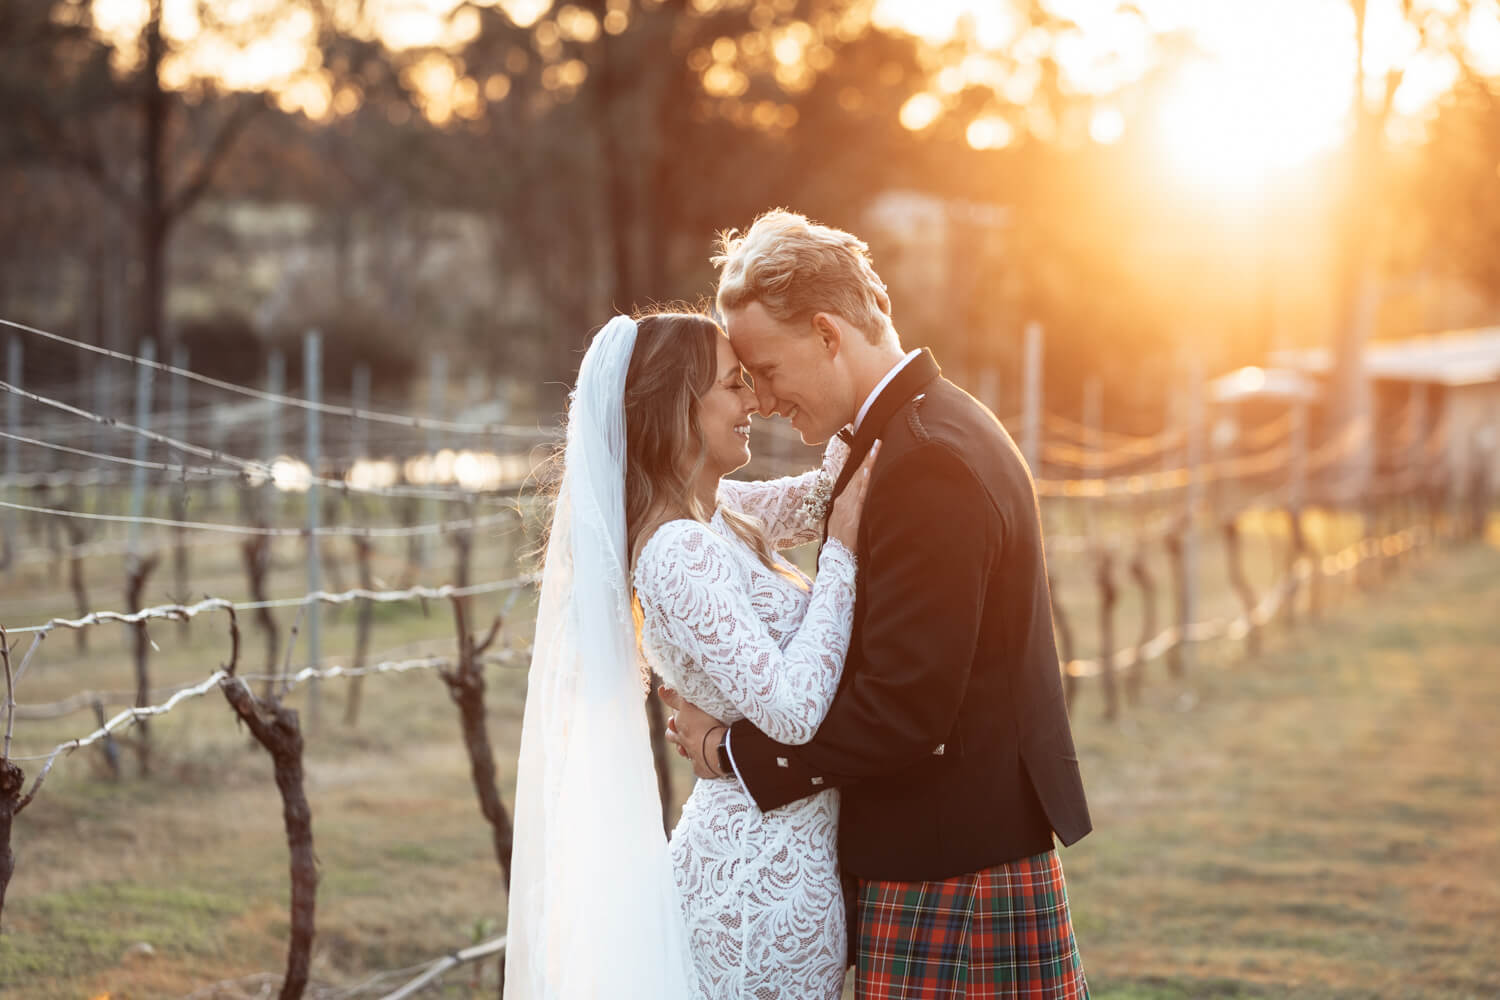 Ashley and Hamish pressing foreheads during their enzo ironbark hill wedding portrait session